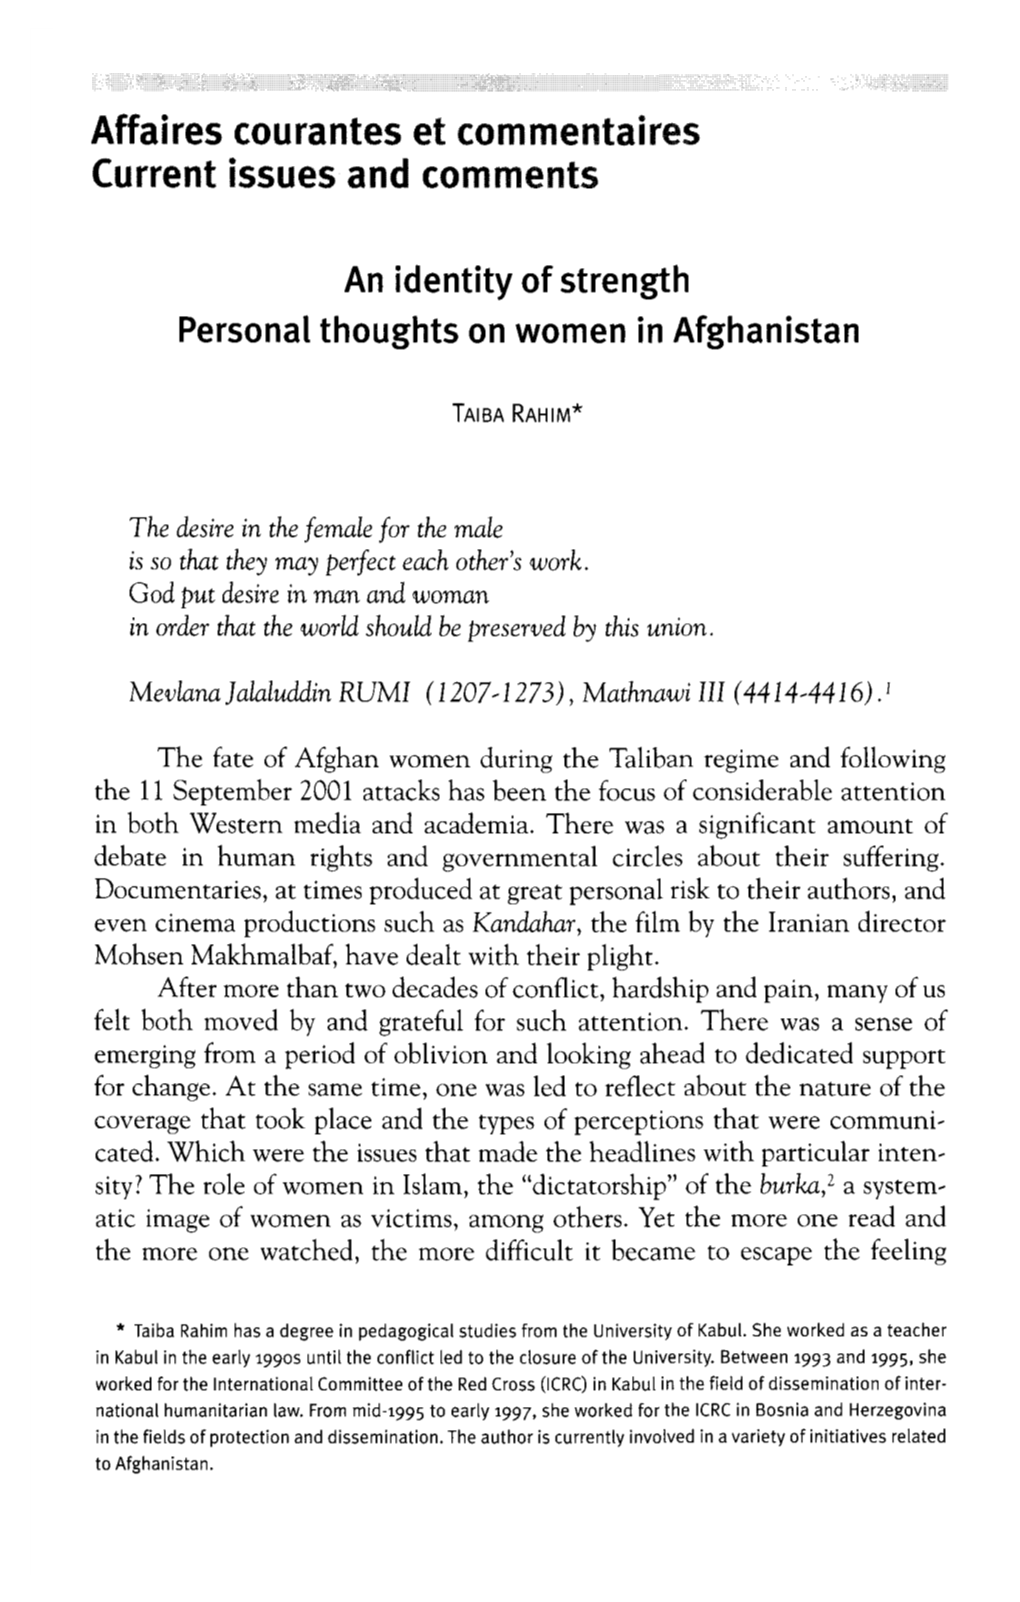 An Identity of Strength Personal Thoughts on Women in Afghanistan